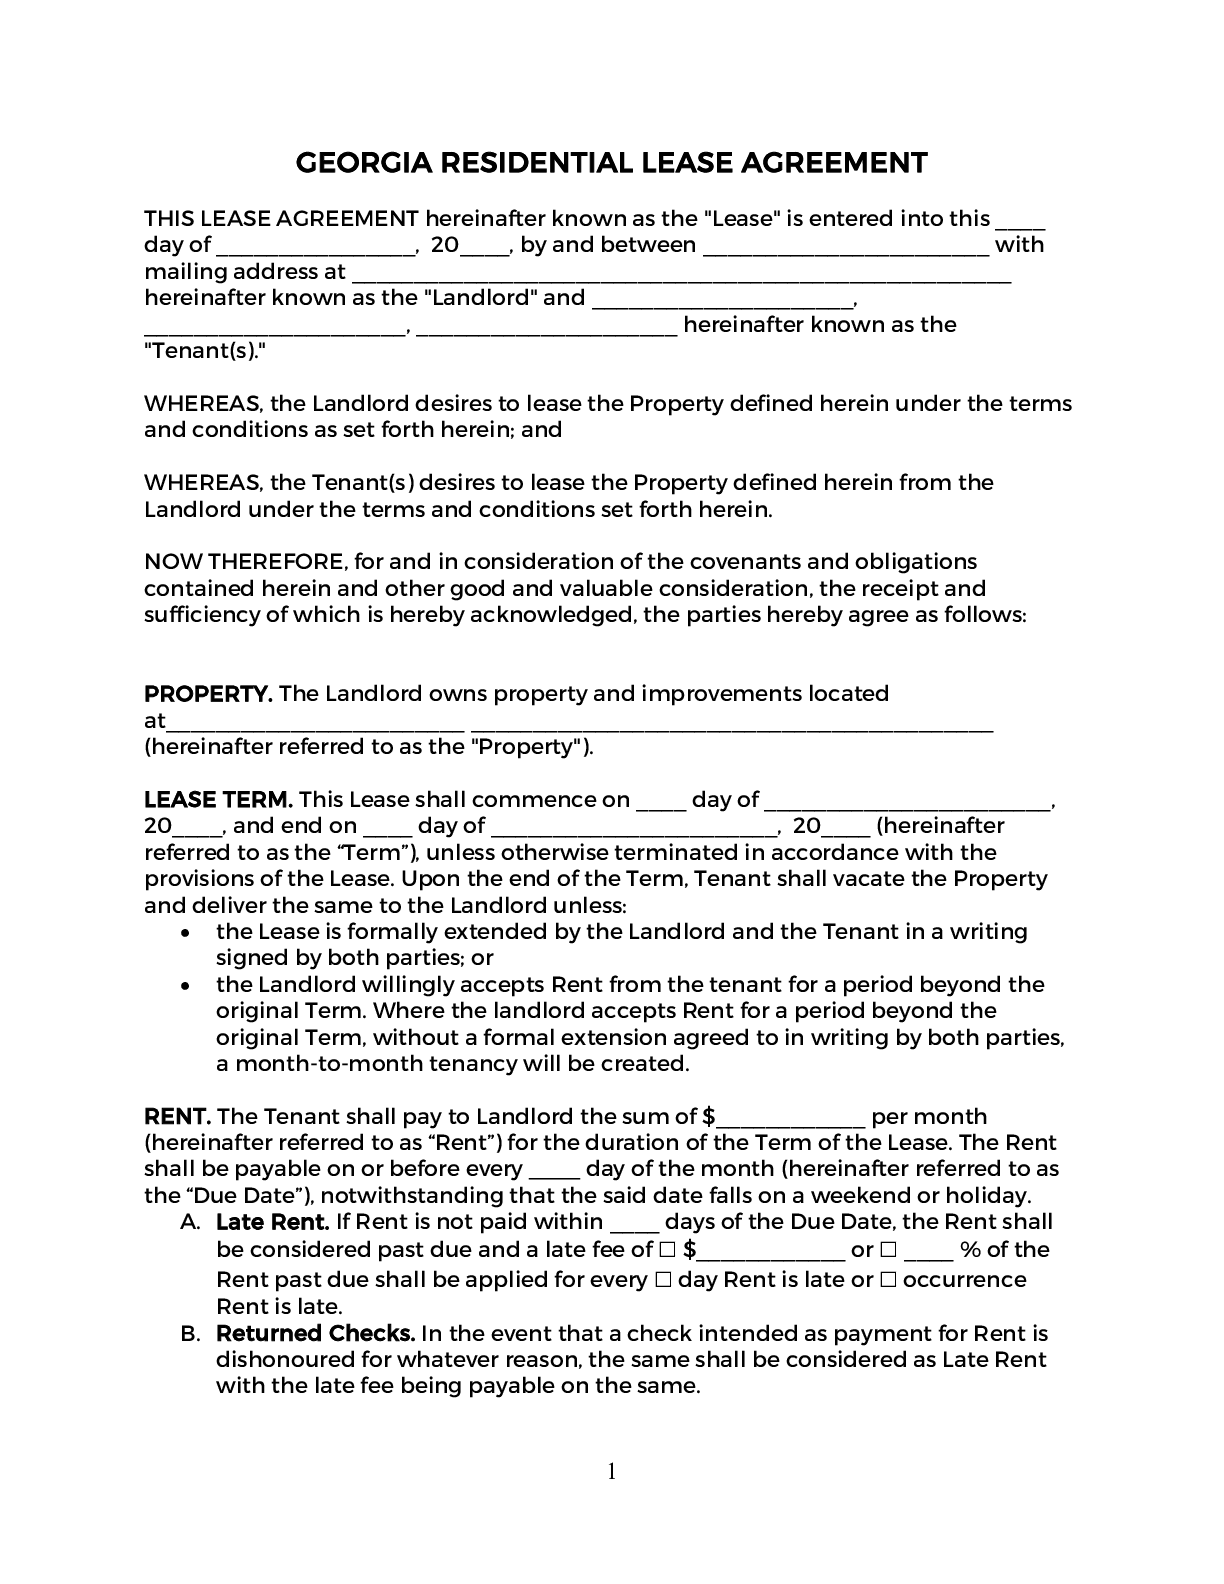 Standard Georgia Residential Lease Agreement Template 1 